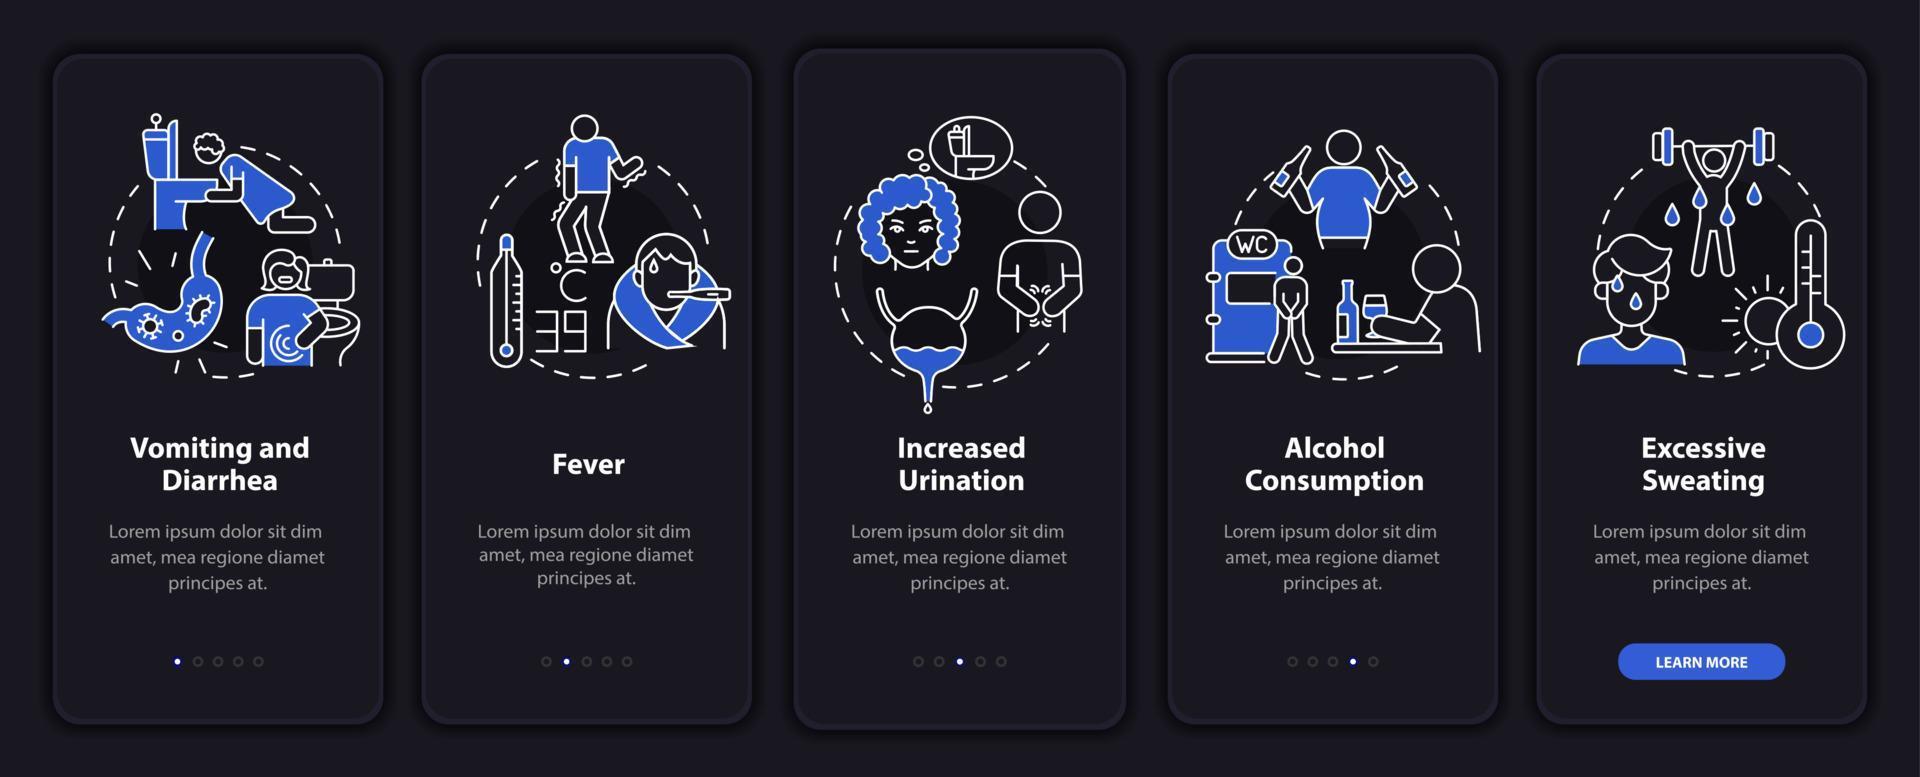 Dehydration causes dark onboarding mobile app page screen. Body water deficit walkthrough 5 steps graphic instructions with concepts. UI, UX, GUI vector template with linear night mode illustrations